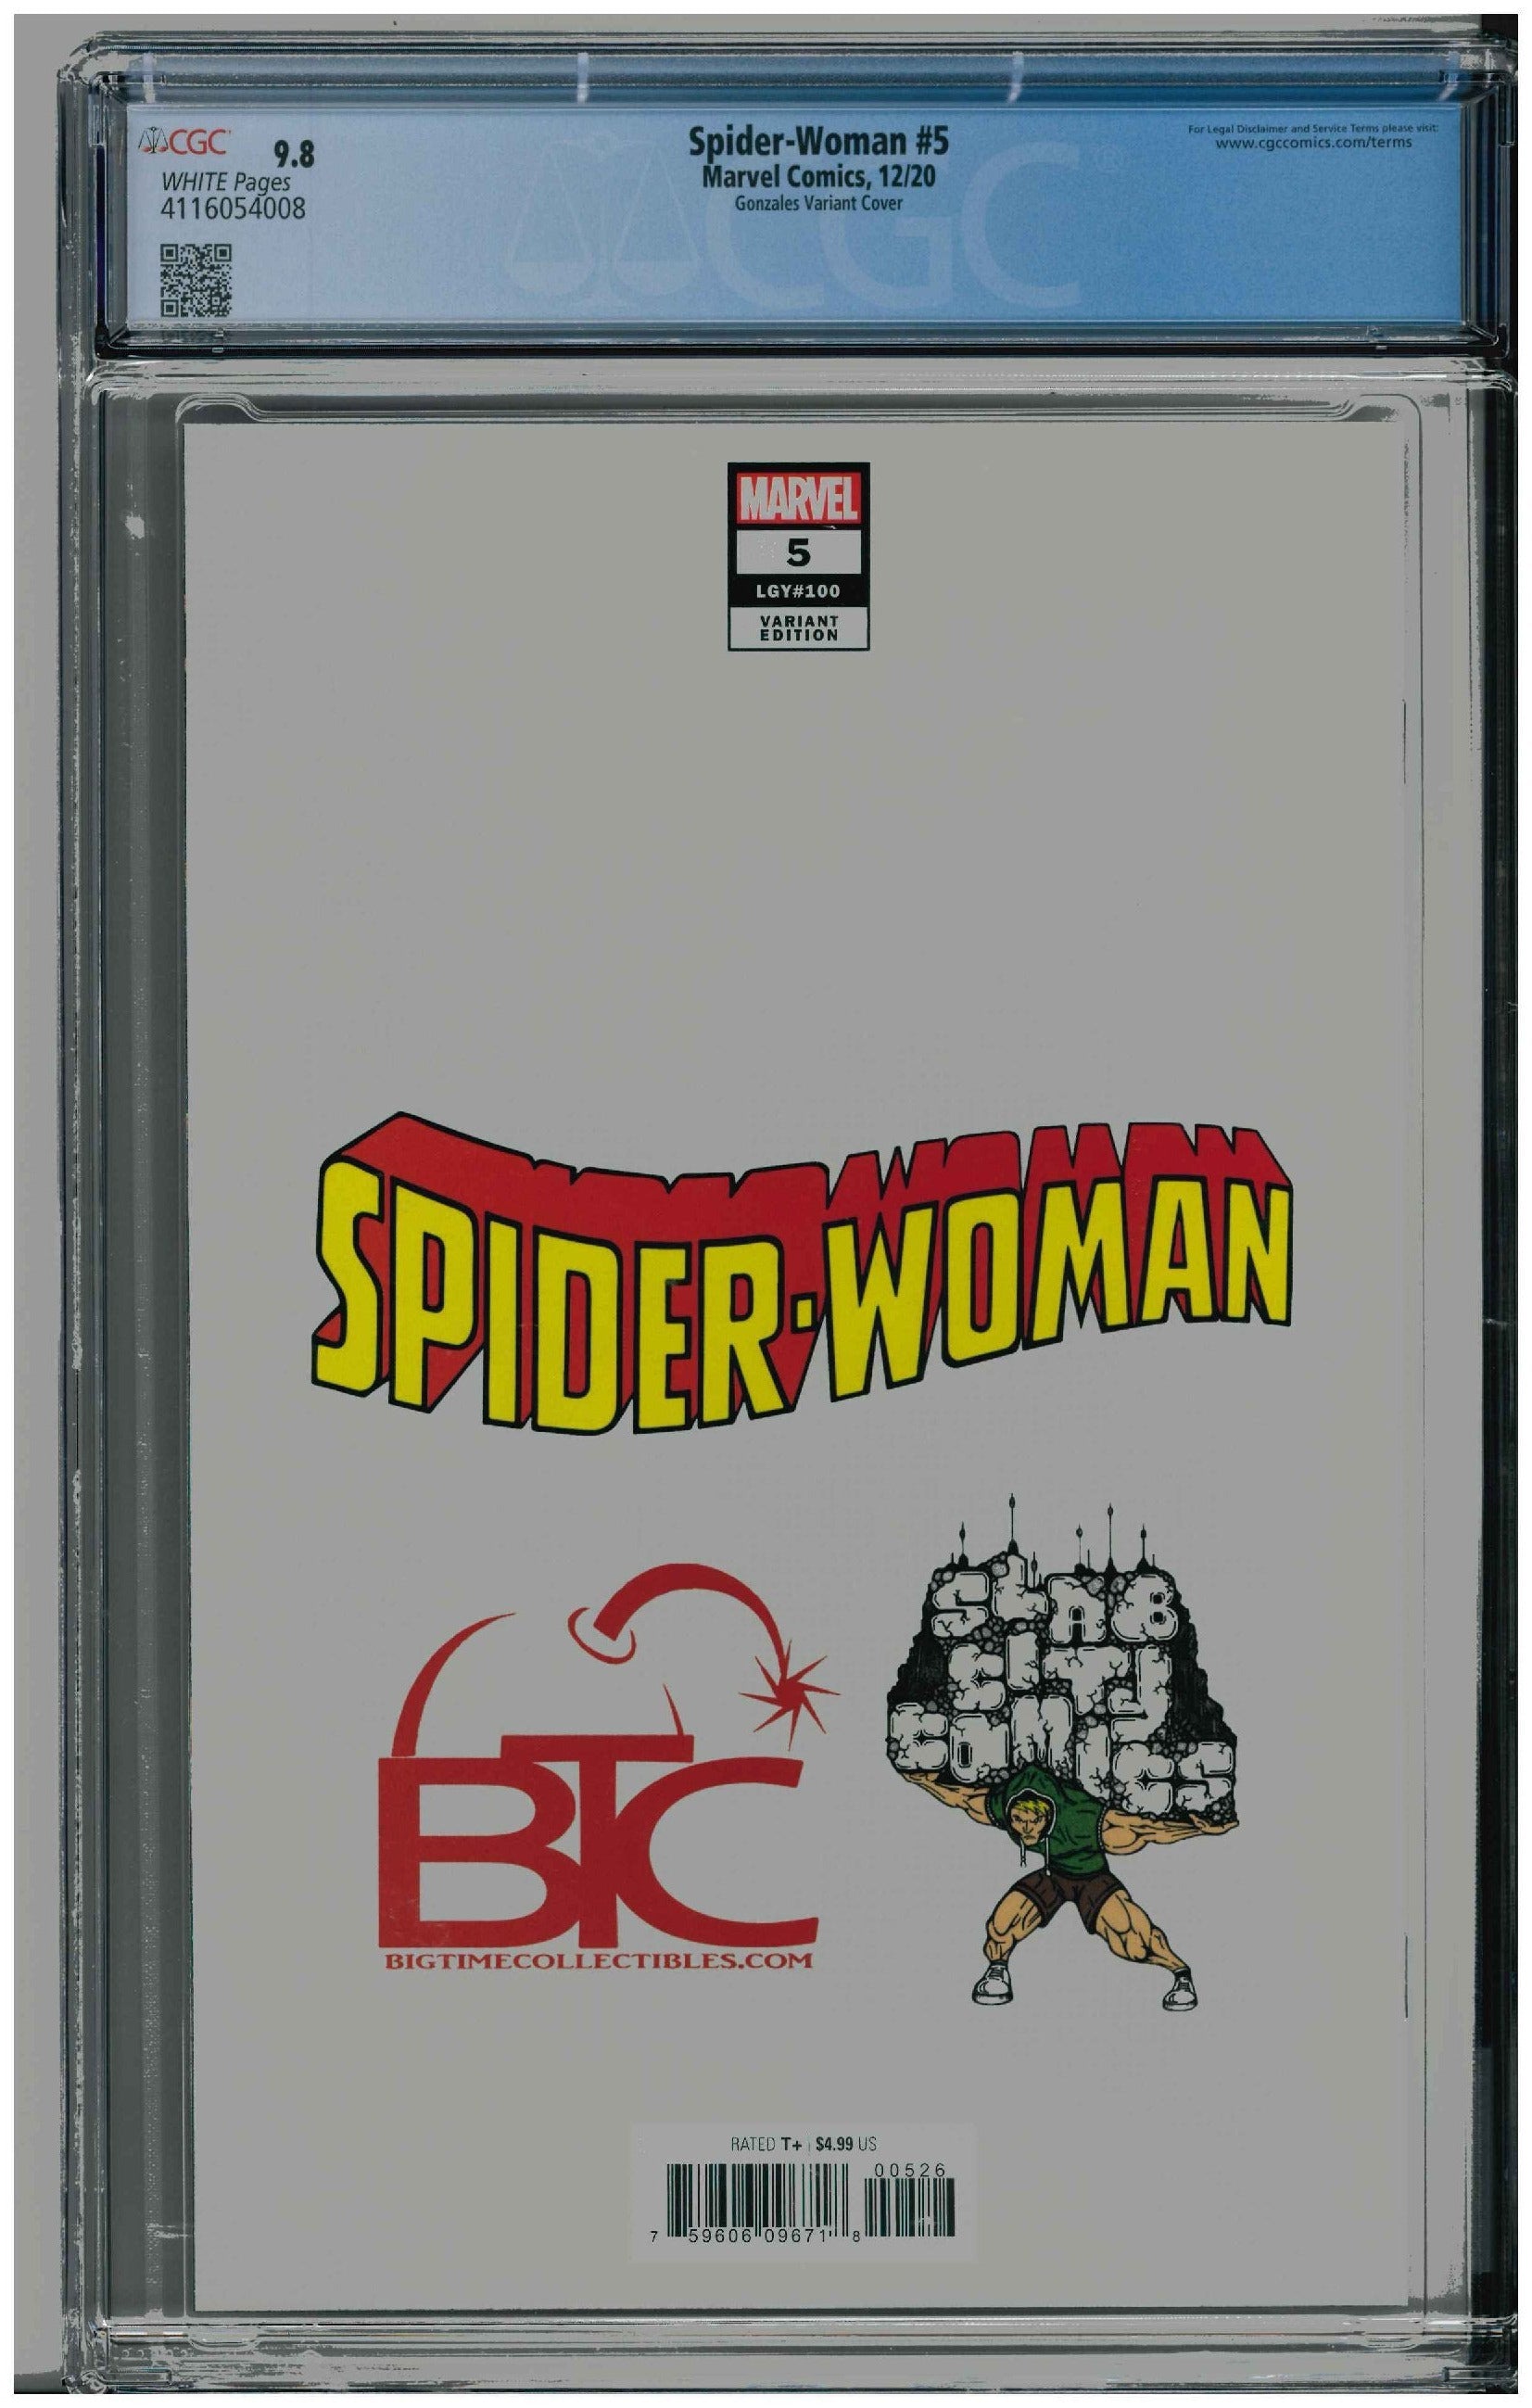 Spider-Woman #5 backside